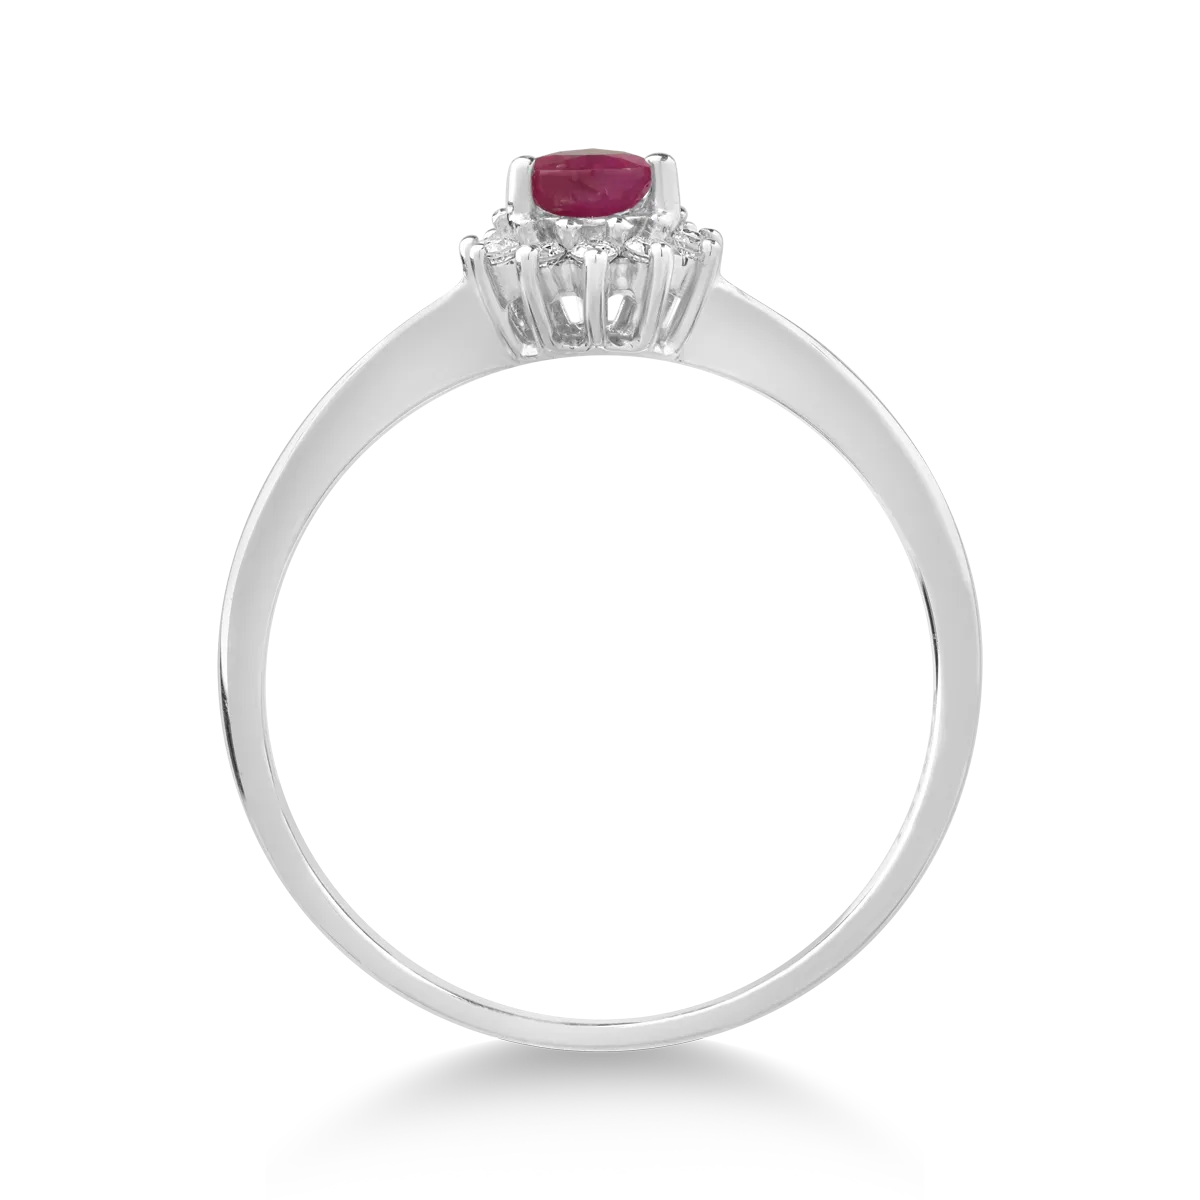 18K white gold ring with 0.282ct ruby and 0.085ct diamonds